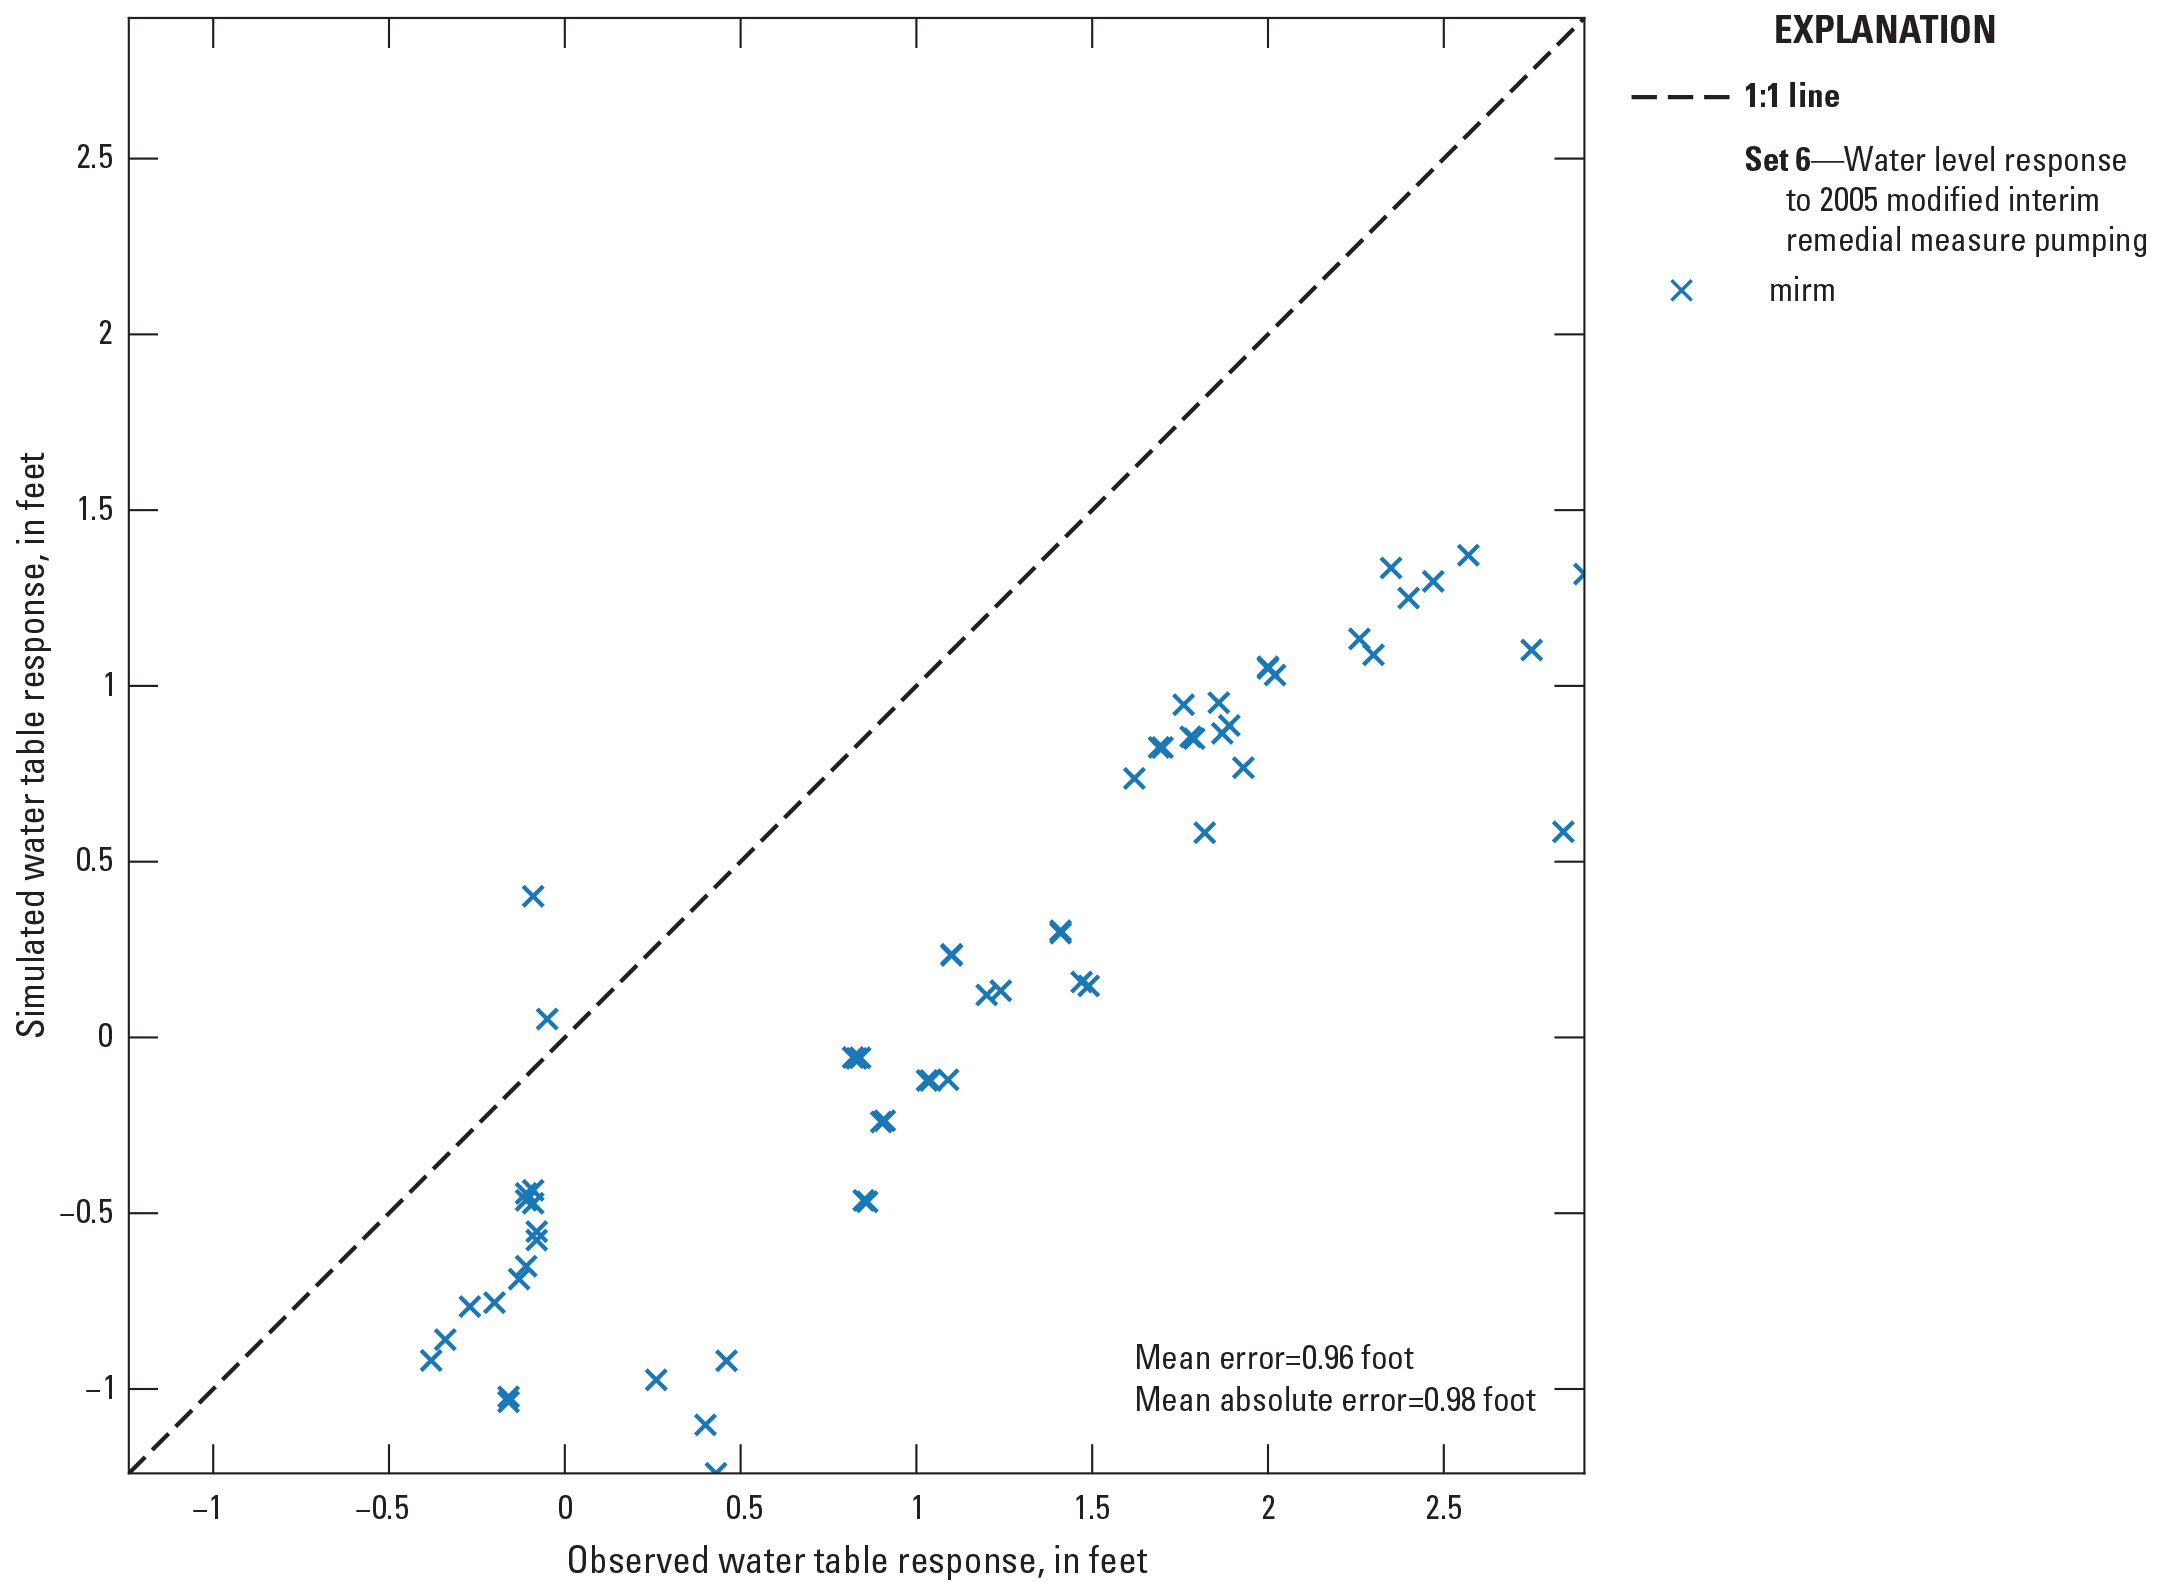 Set 6 observed and simulated water level responses are shown with a 1:1 line. The
                  observed values are generally higher than the simulated values.